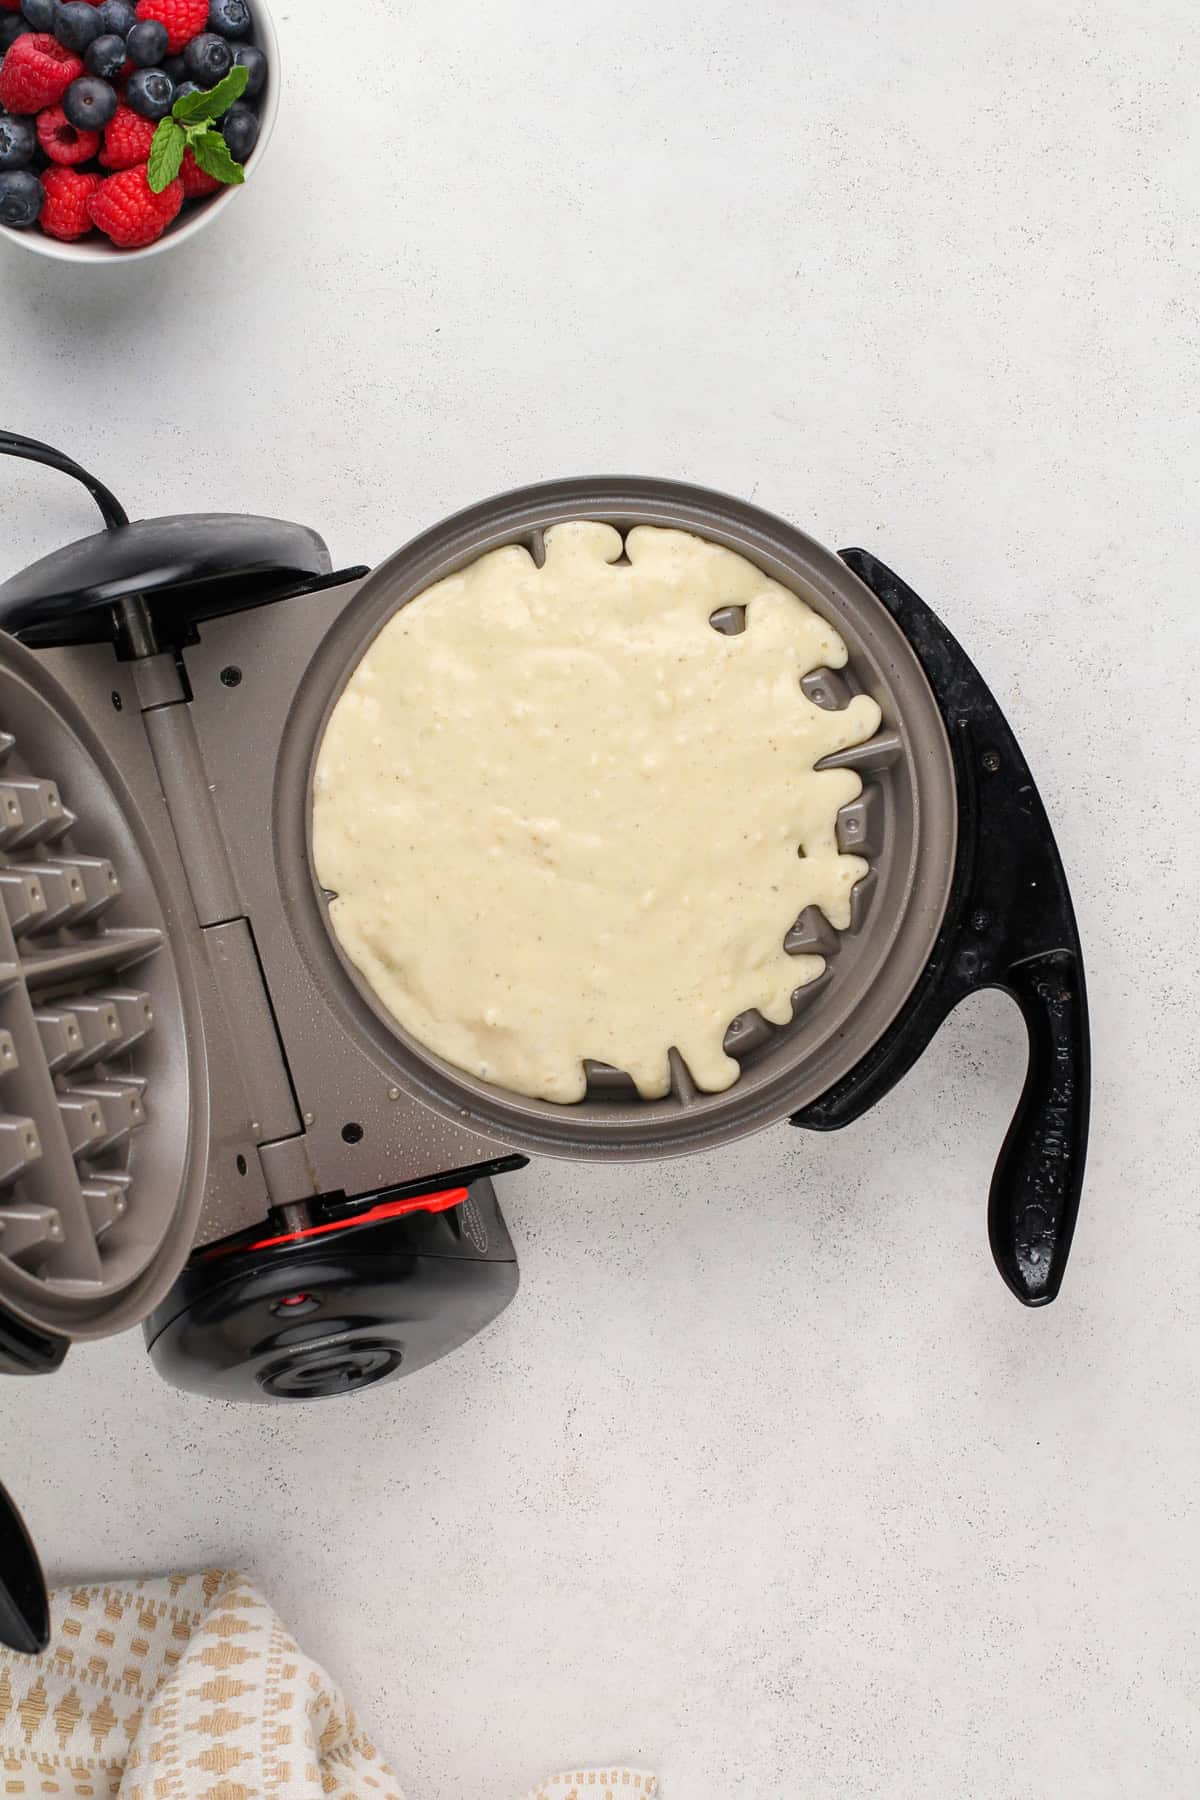 Homemade waffle batter in a waffle iron.